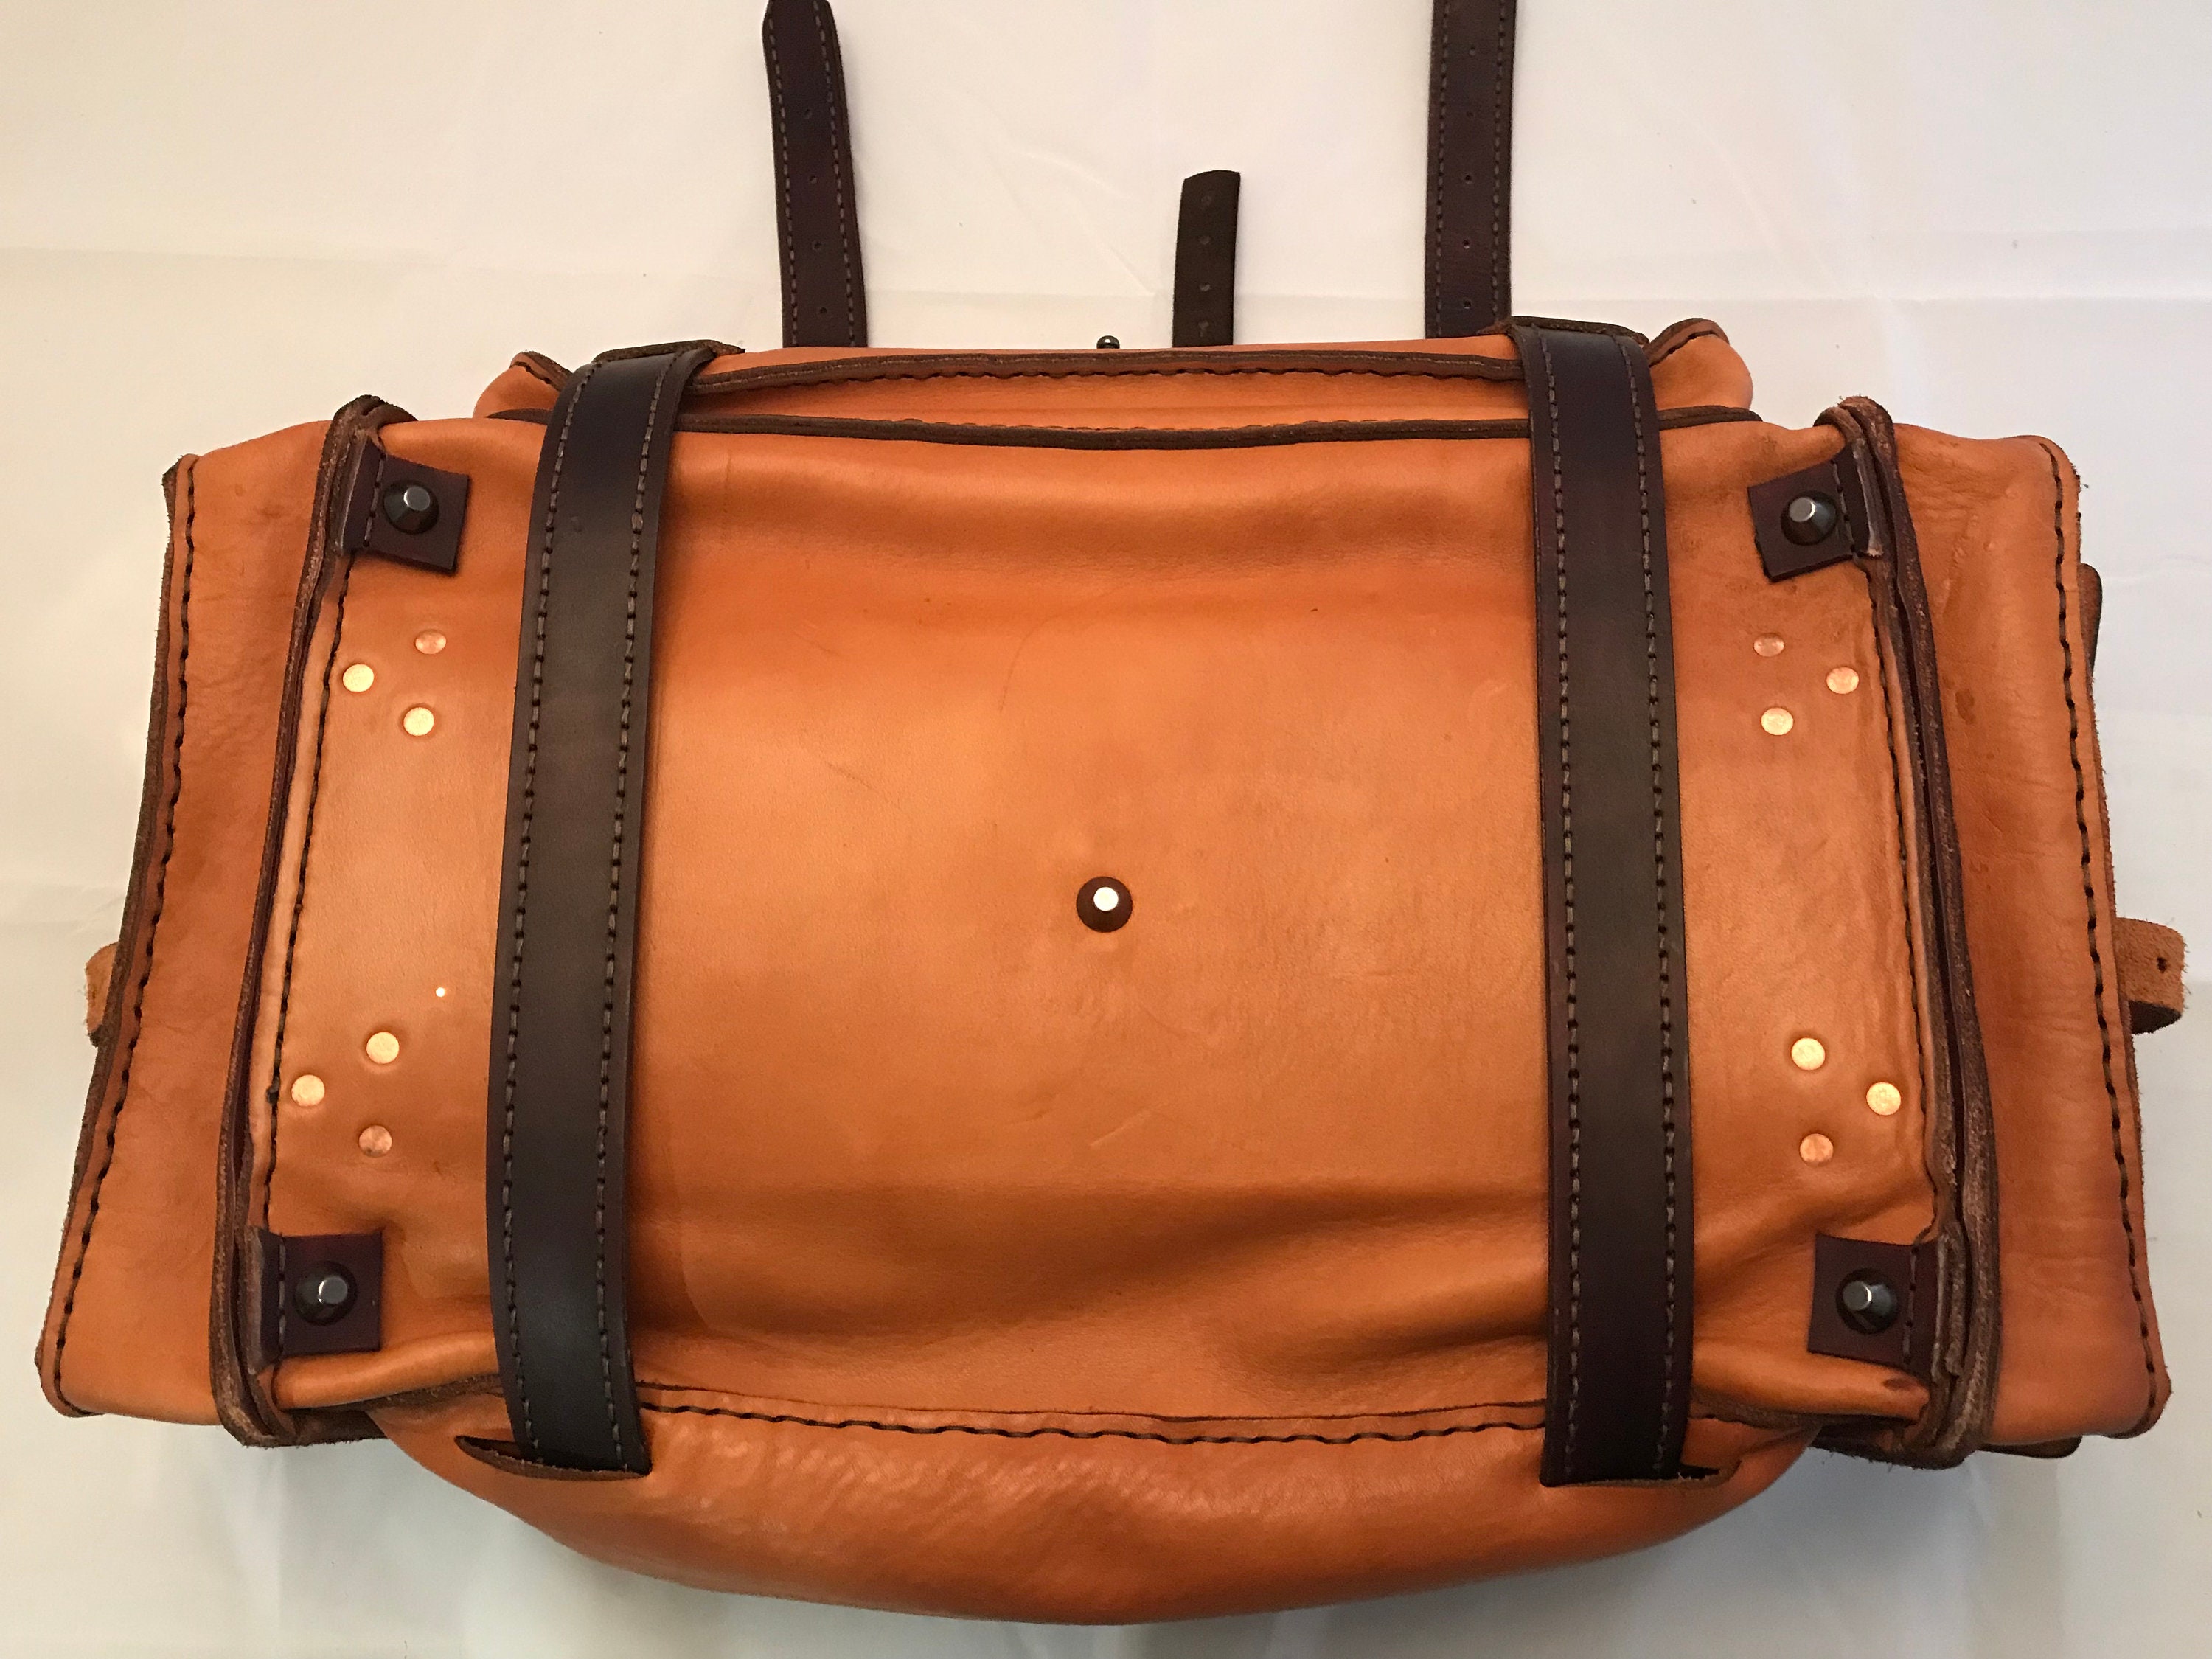 Paxton Messenger Bag Kit from Tandy Leather